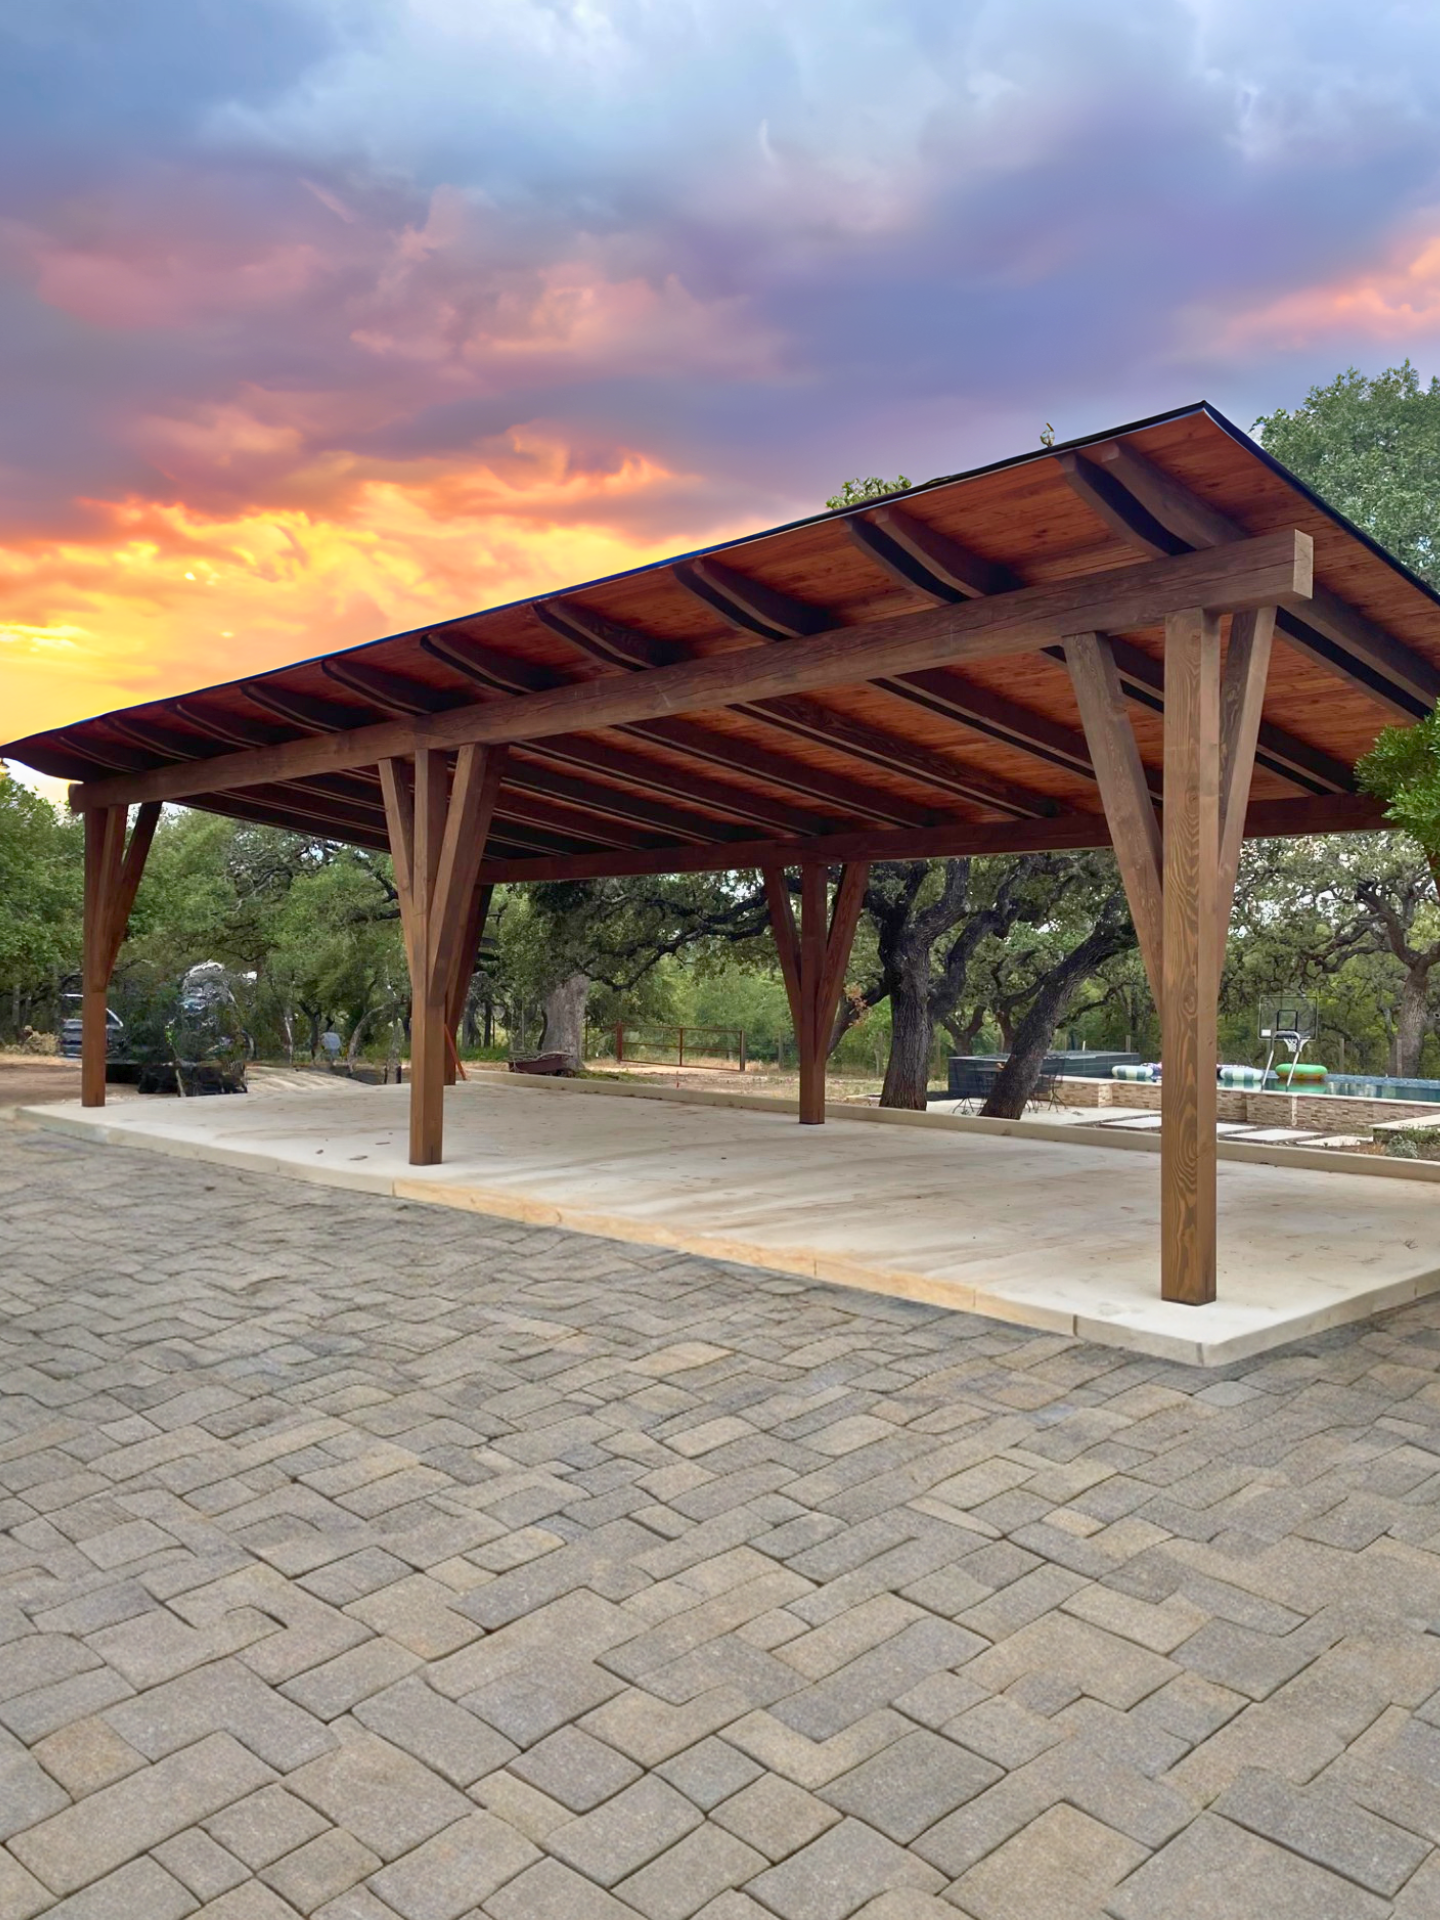 Boerne, Texas, hill country, pavilions, carport, car covering, outdoor garage, outdoor entertaining, venue covering, freestanding, modern, pavilion kit, shade covering, pool covering